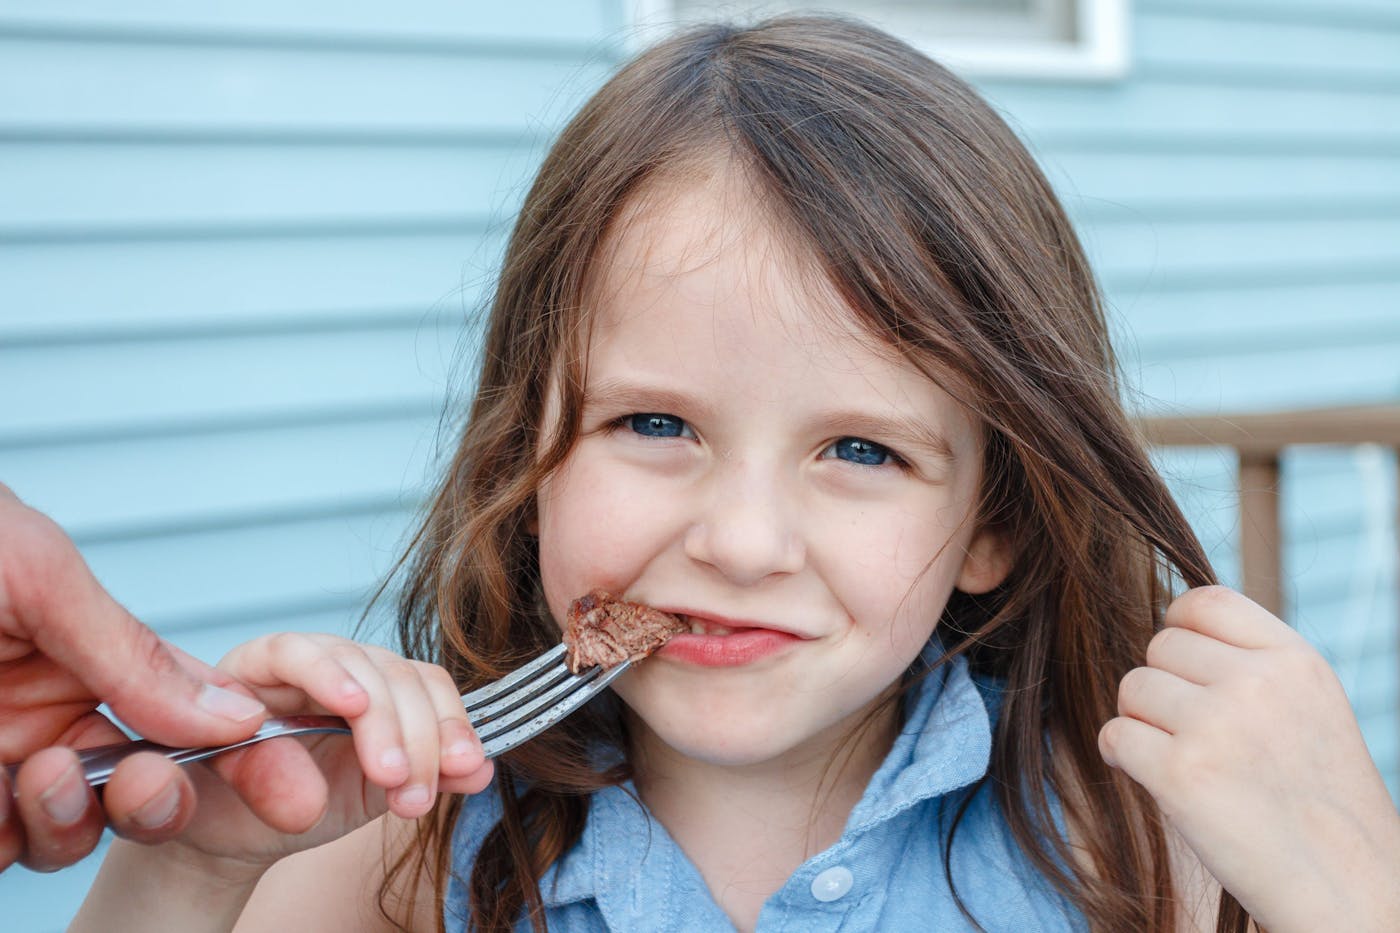 Child eating beef on a fork assisted by an adult.